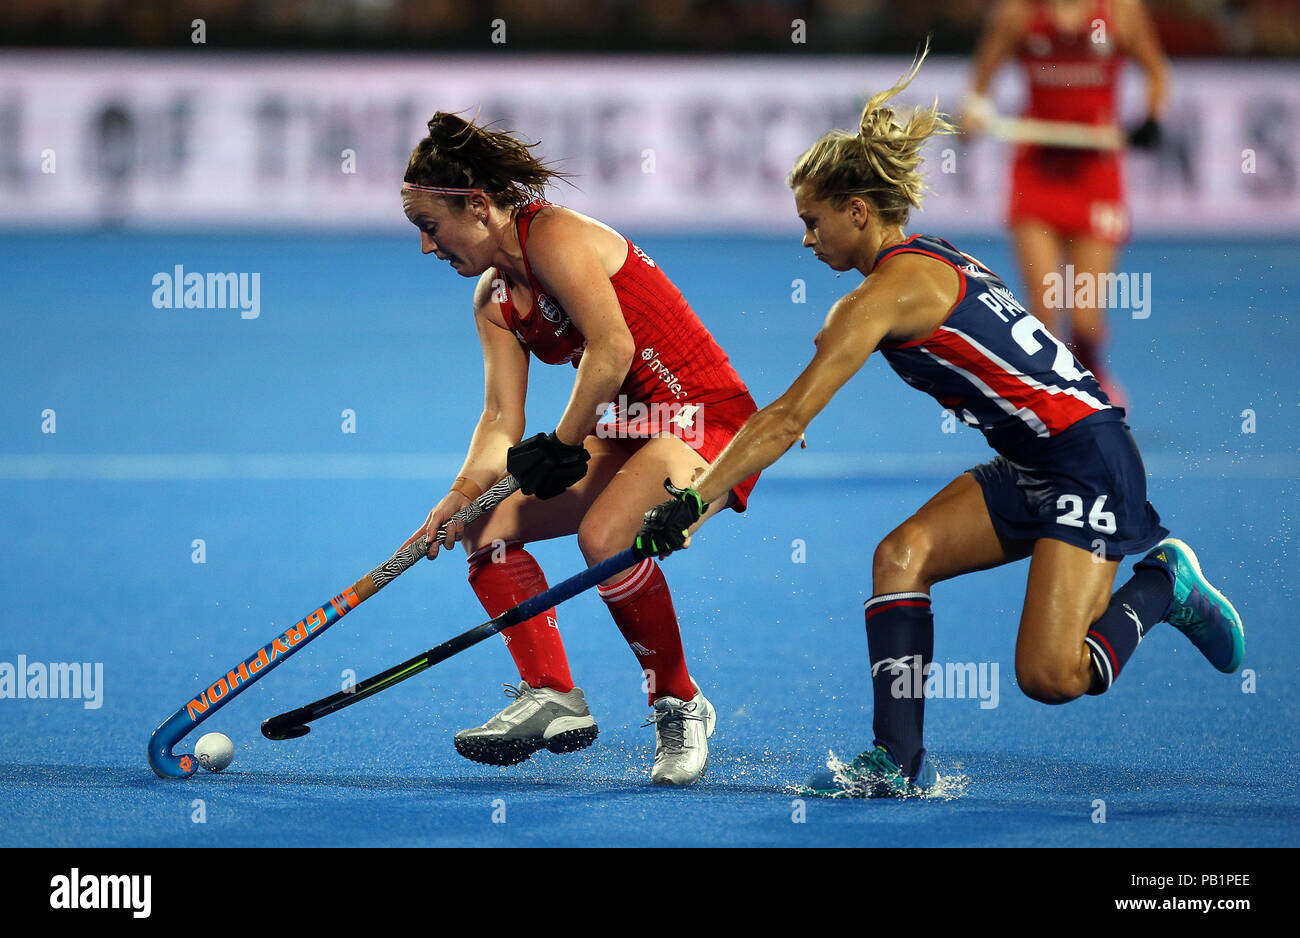 England''s Laura Unsworth and united States Margausx Paolino in action during the national Vitality Women's Hockey World Cup match at The Lee Valley Hockey and Tennis Centre, London. PRESS ASSOCIATION Photo, Picture date: Wednesday July 25, 2018. Photo credit should read: Steven Paston/PA Wire. Stock Photo